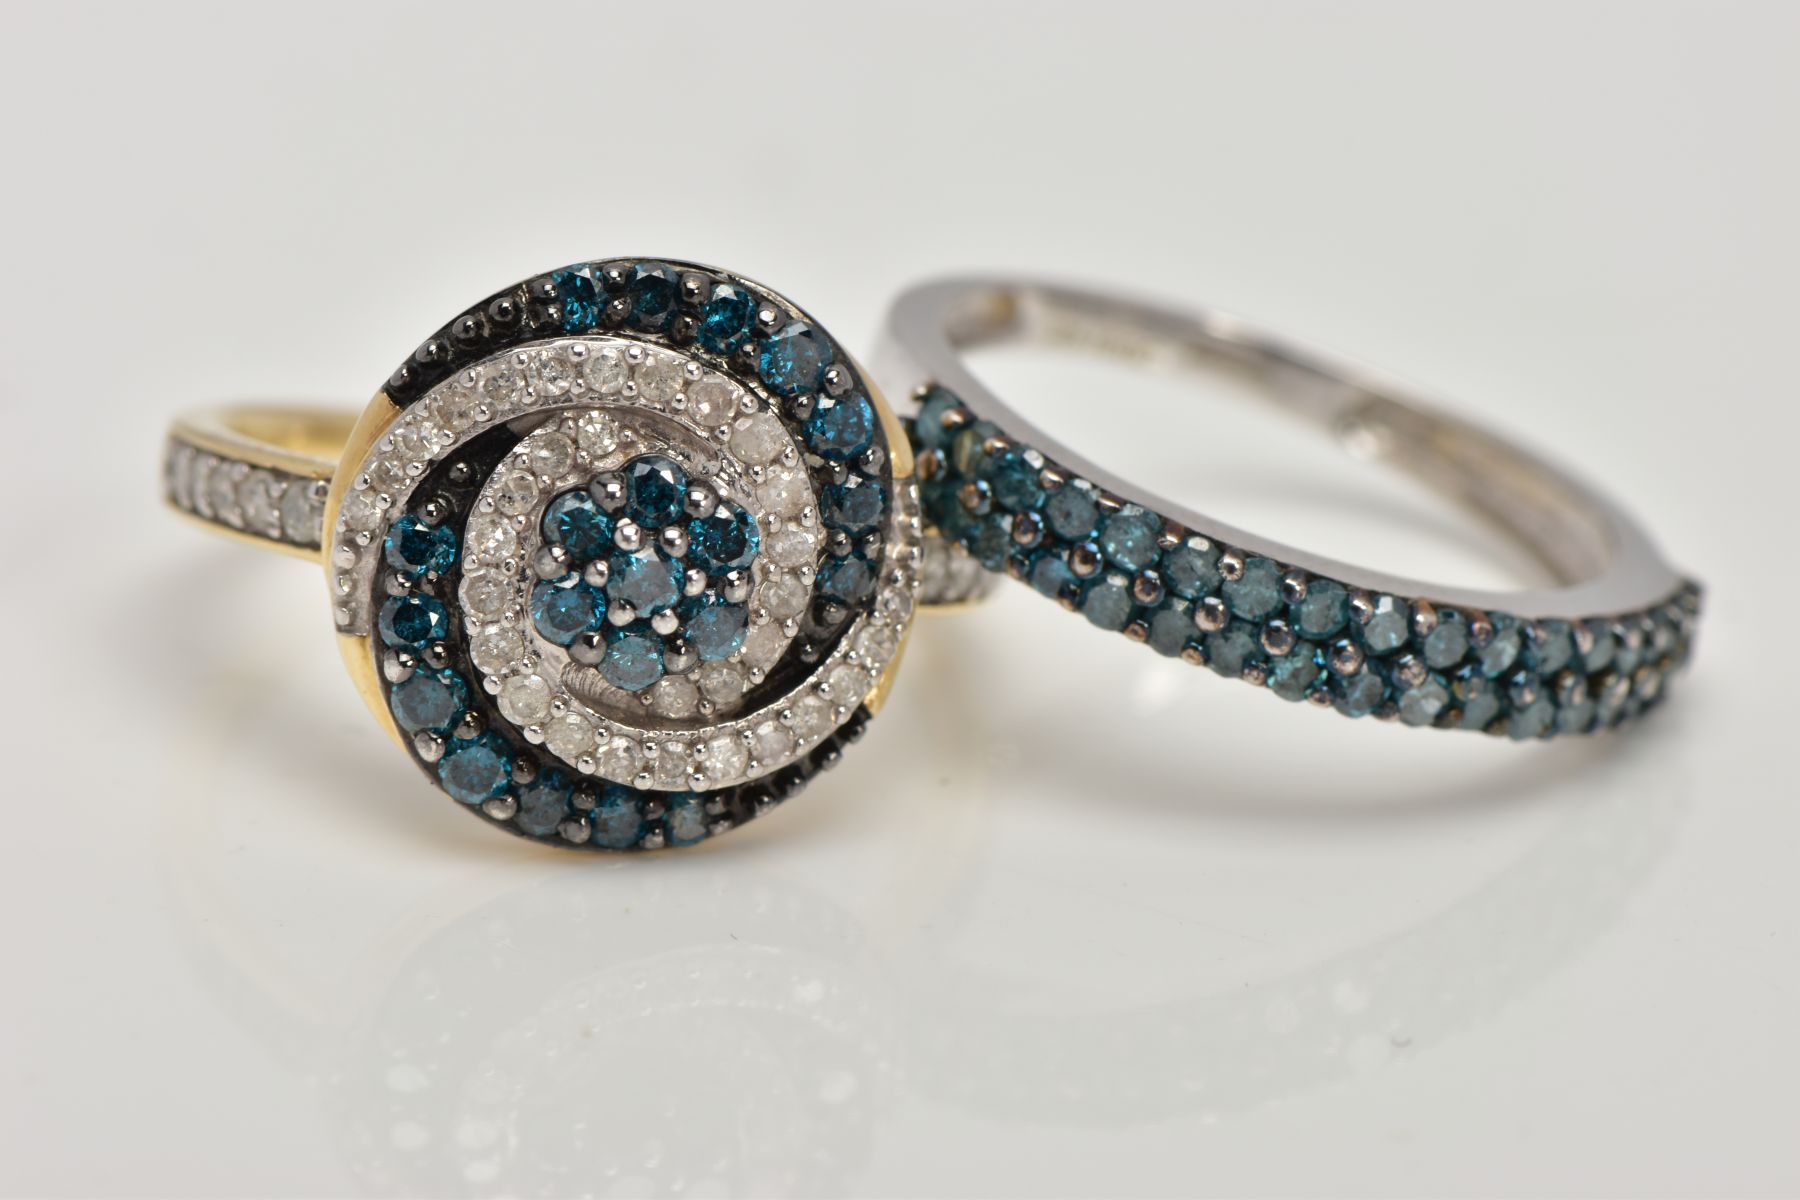 TWO 9CT GOLD DIAMOND RINGS, the first a brilliant cut treated blue diamond and single cut diamond